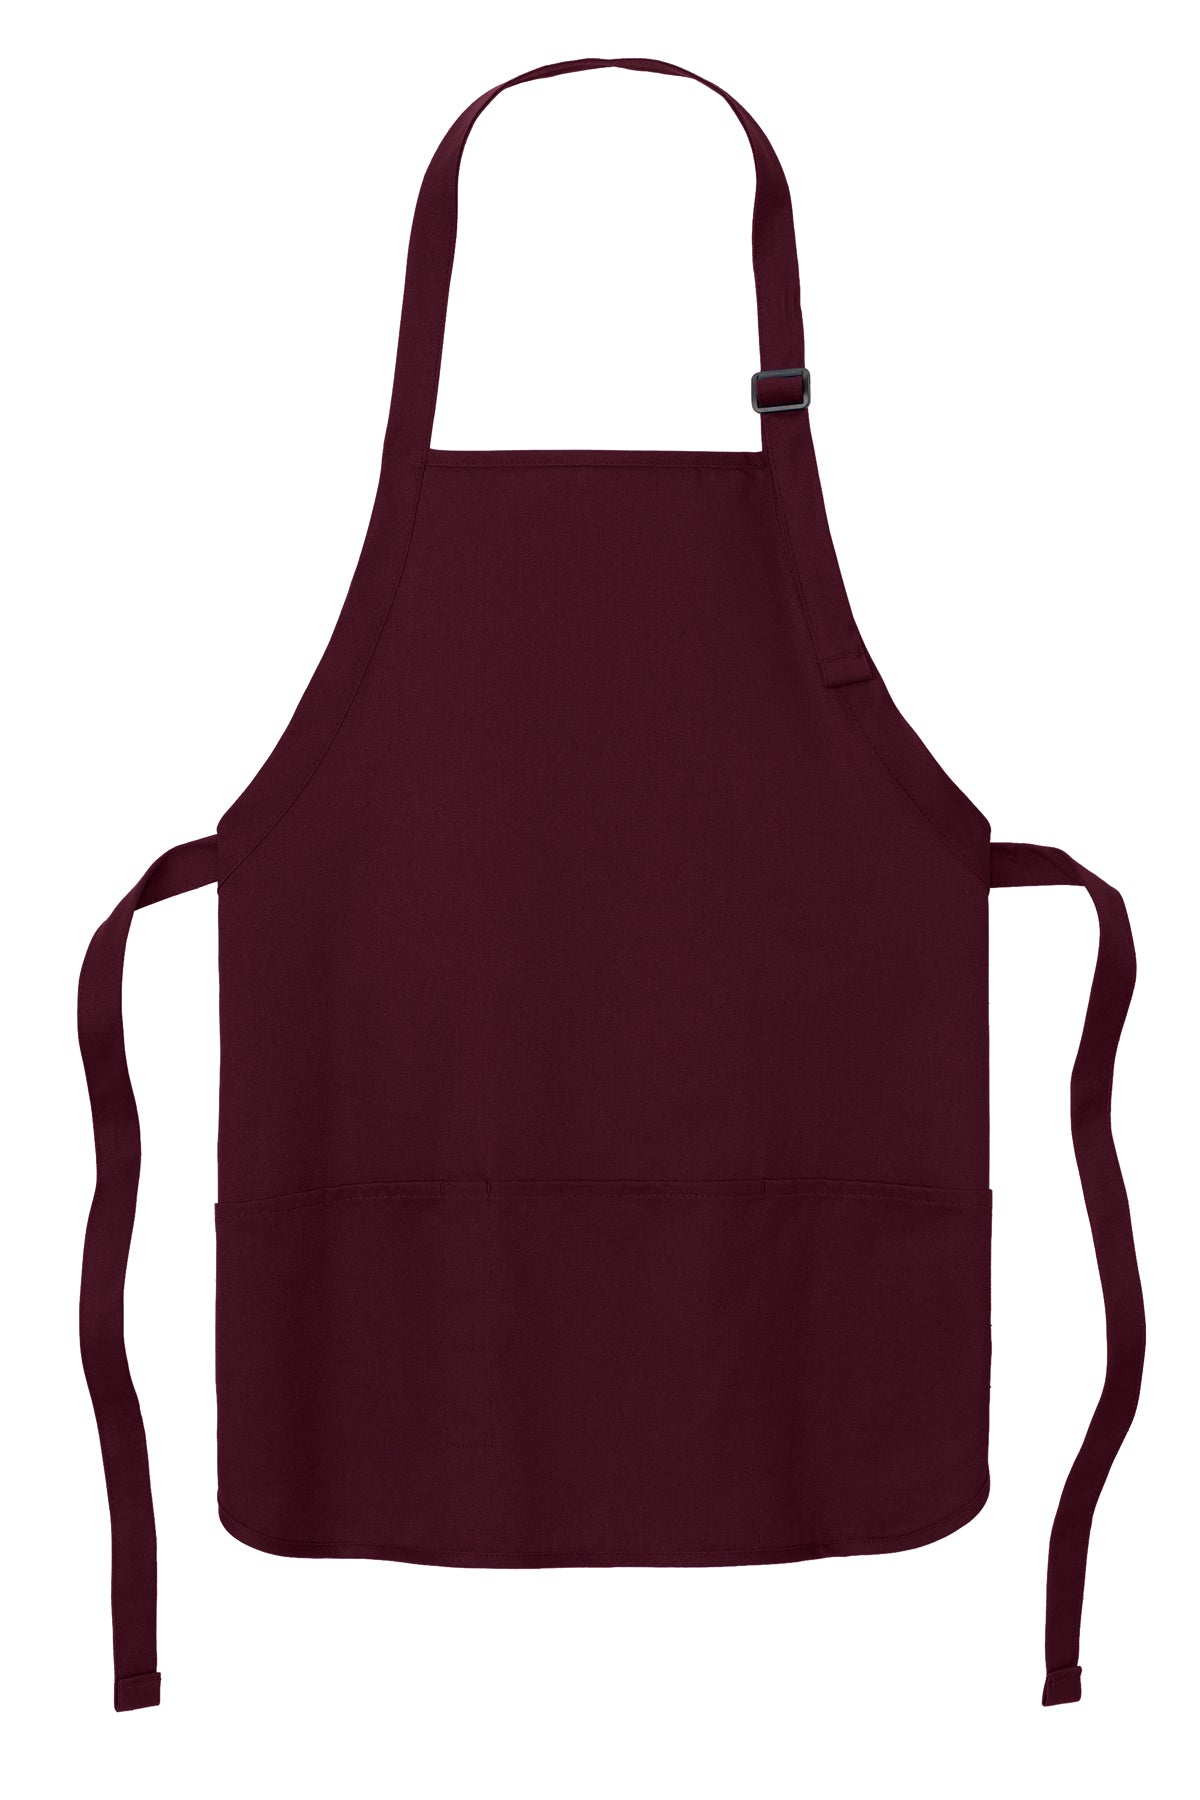 Port Authority Medium-Length Apron with Pouch Pockets A510 Maroon